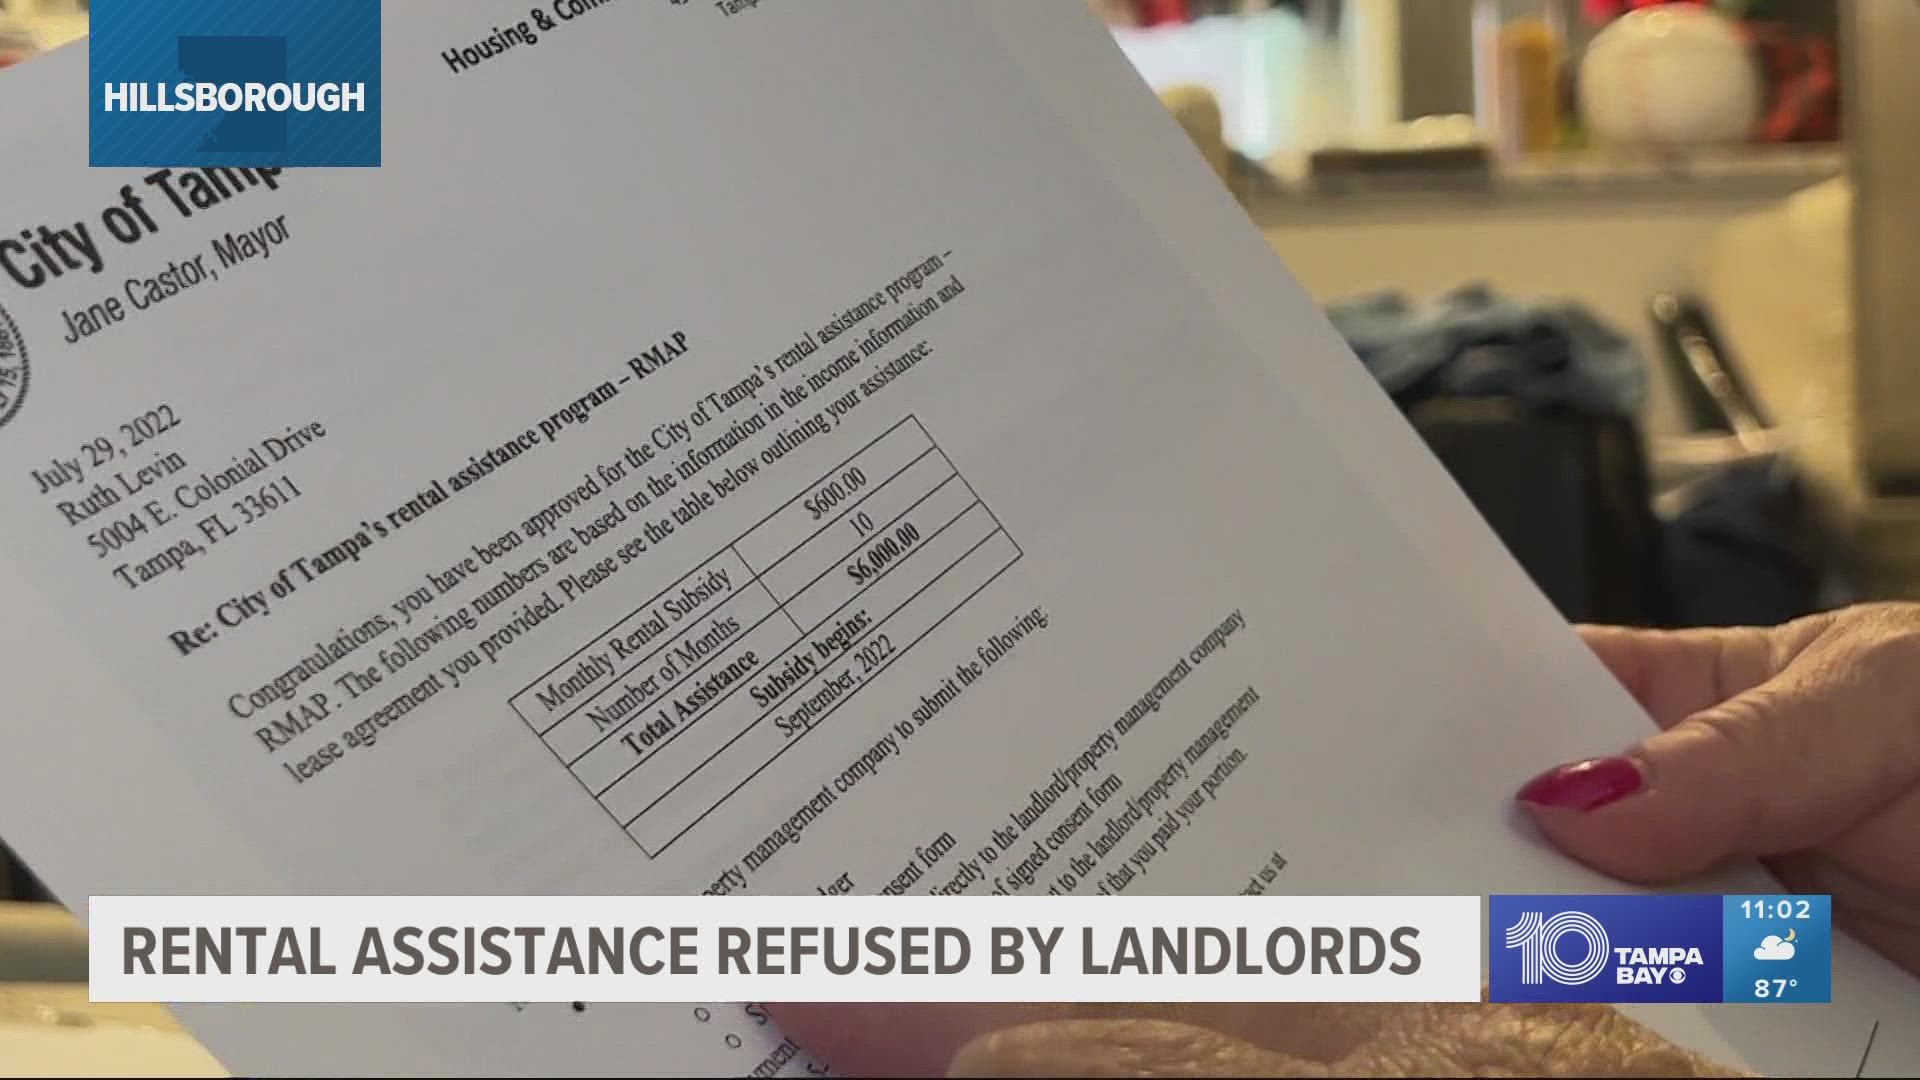 Ruth Levin said the assistance is just what she and her partner needed to afford her rent hike.